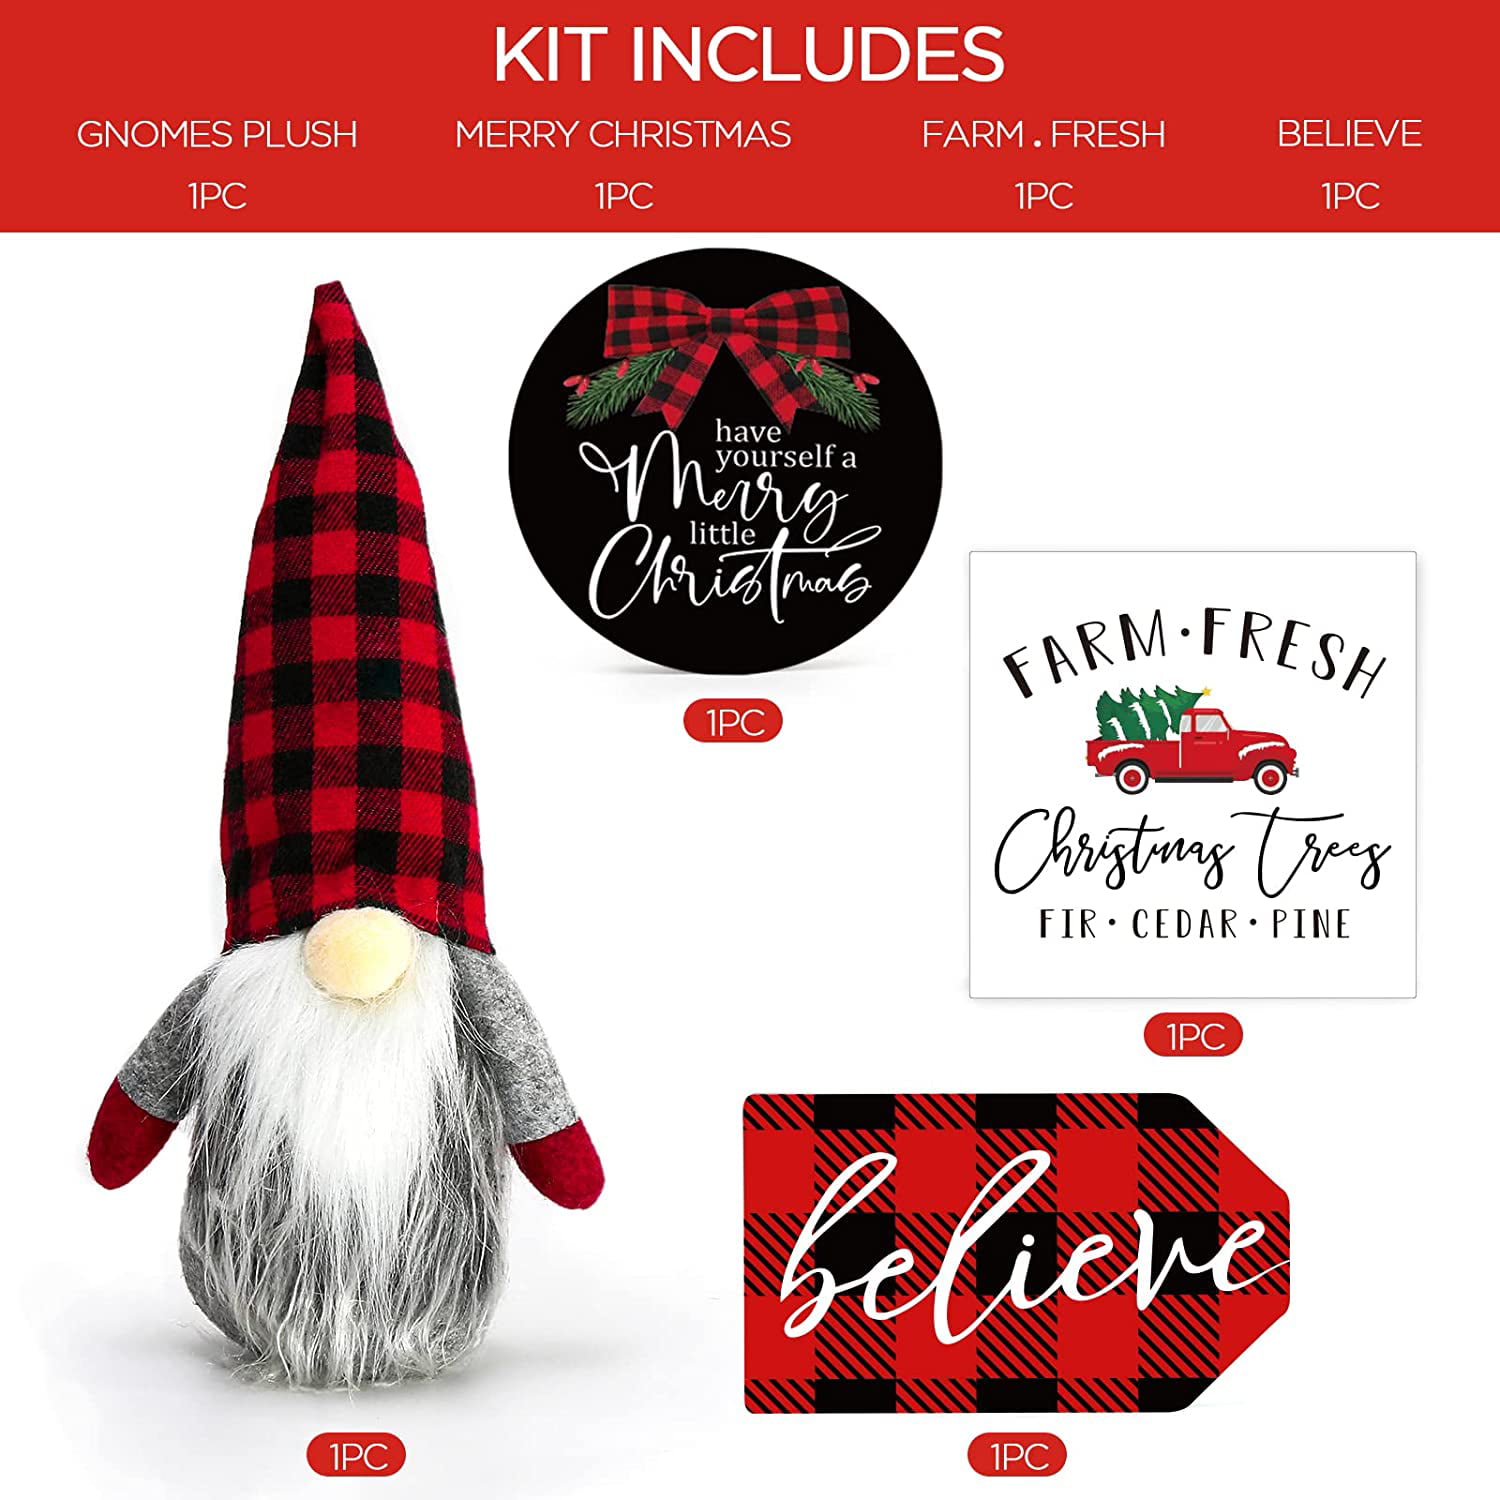 Believe Merry Christmas Wooden Signs & Buffalo Plaid Gnomes Plush Set Farmhouse Rustic Tiered Tray Country Decor Farm Fresh Christmas Decorations Indoor for Home Room Table Mantle Fireplace A